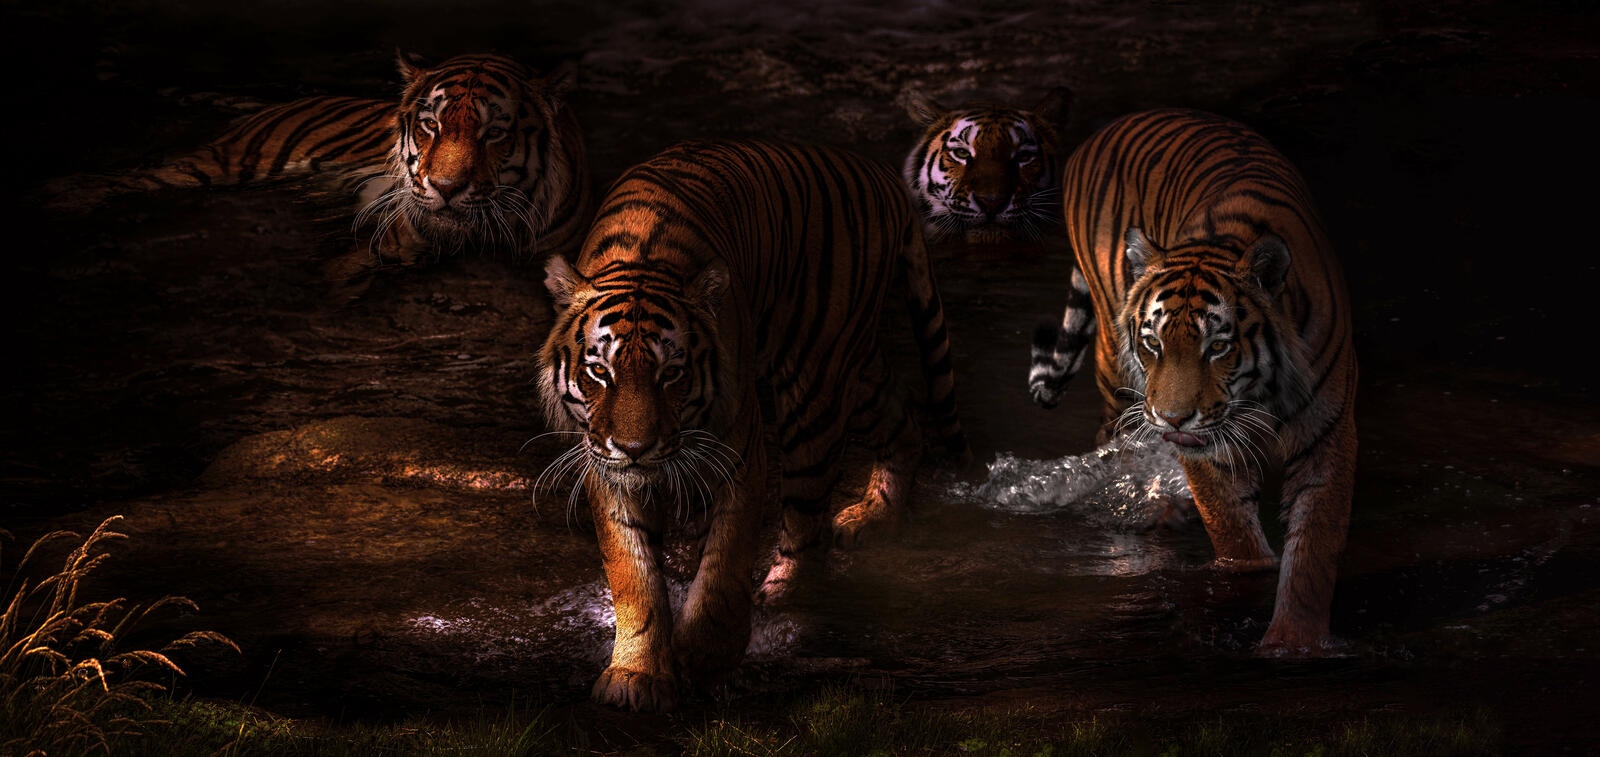 Wallpapers twilight river tigers on the desktop